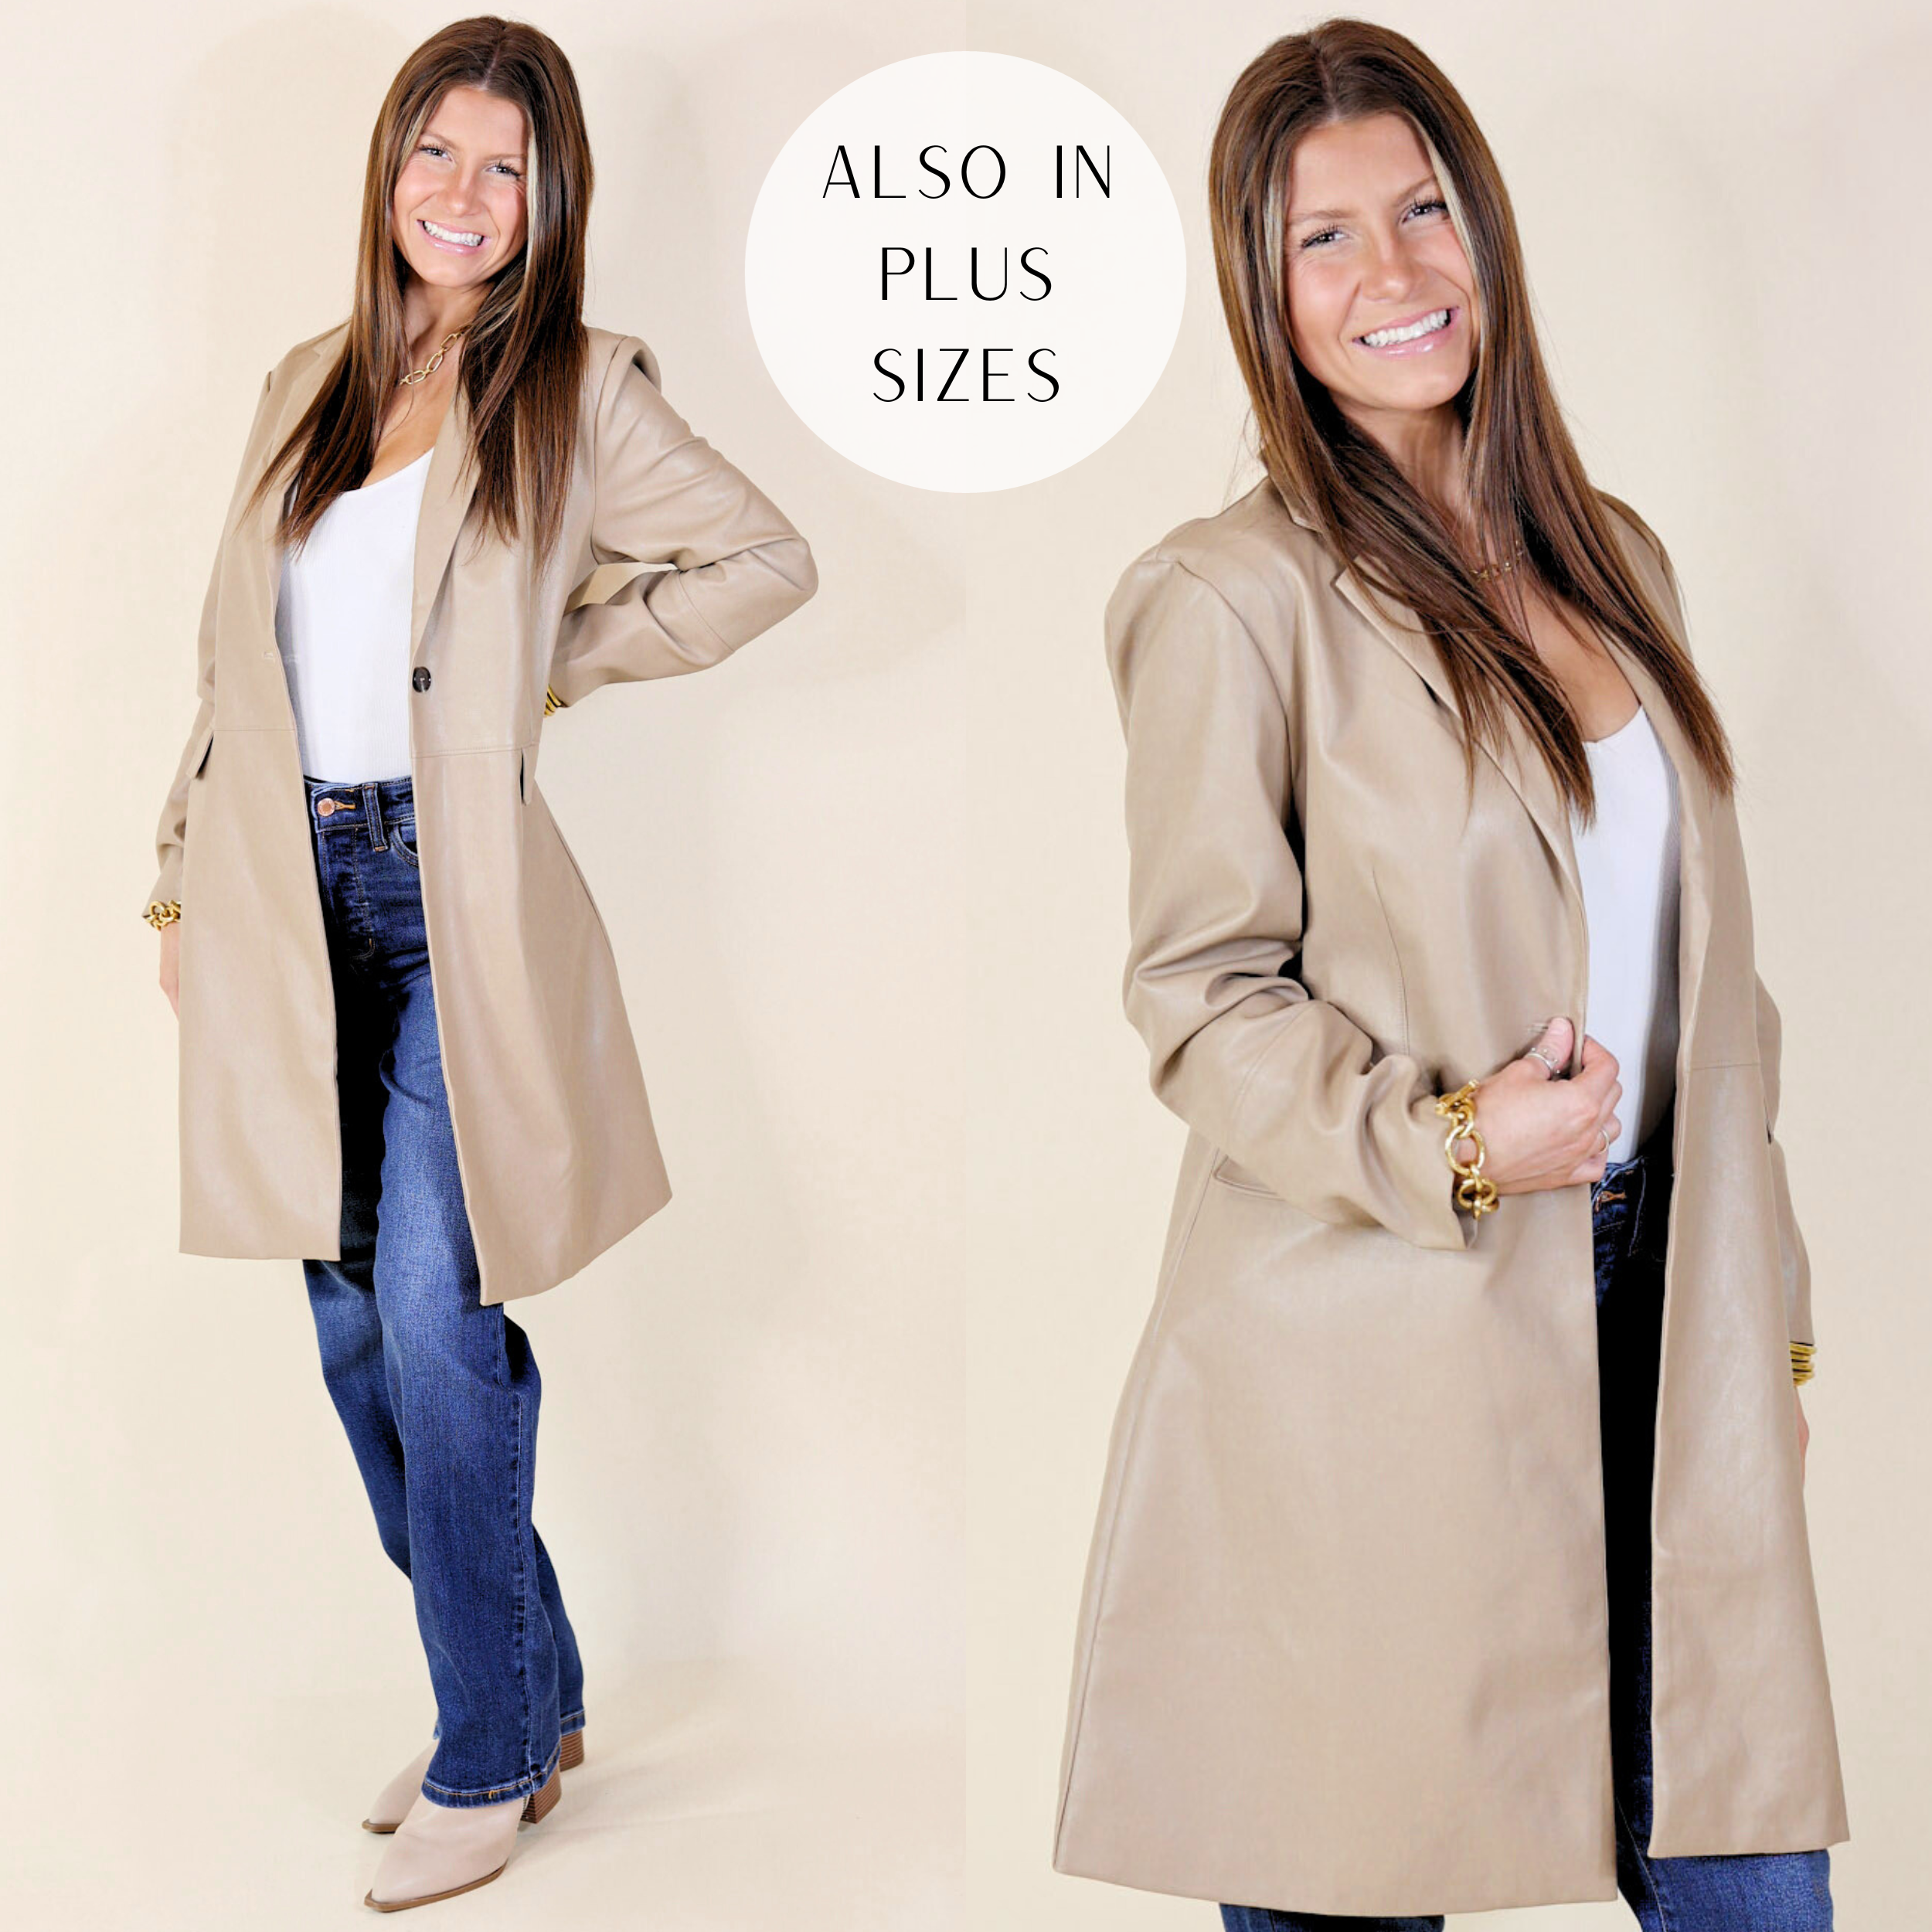 Model is wearing a long taupe colored faux leather coat with long sleeves and a collar